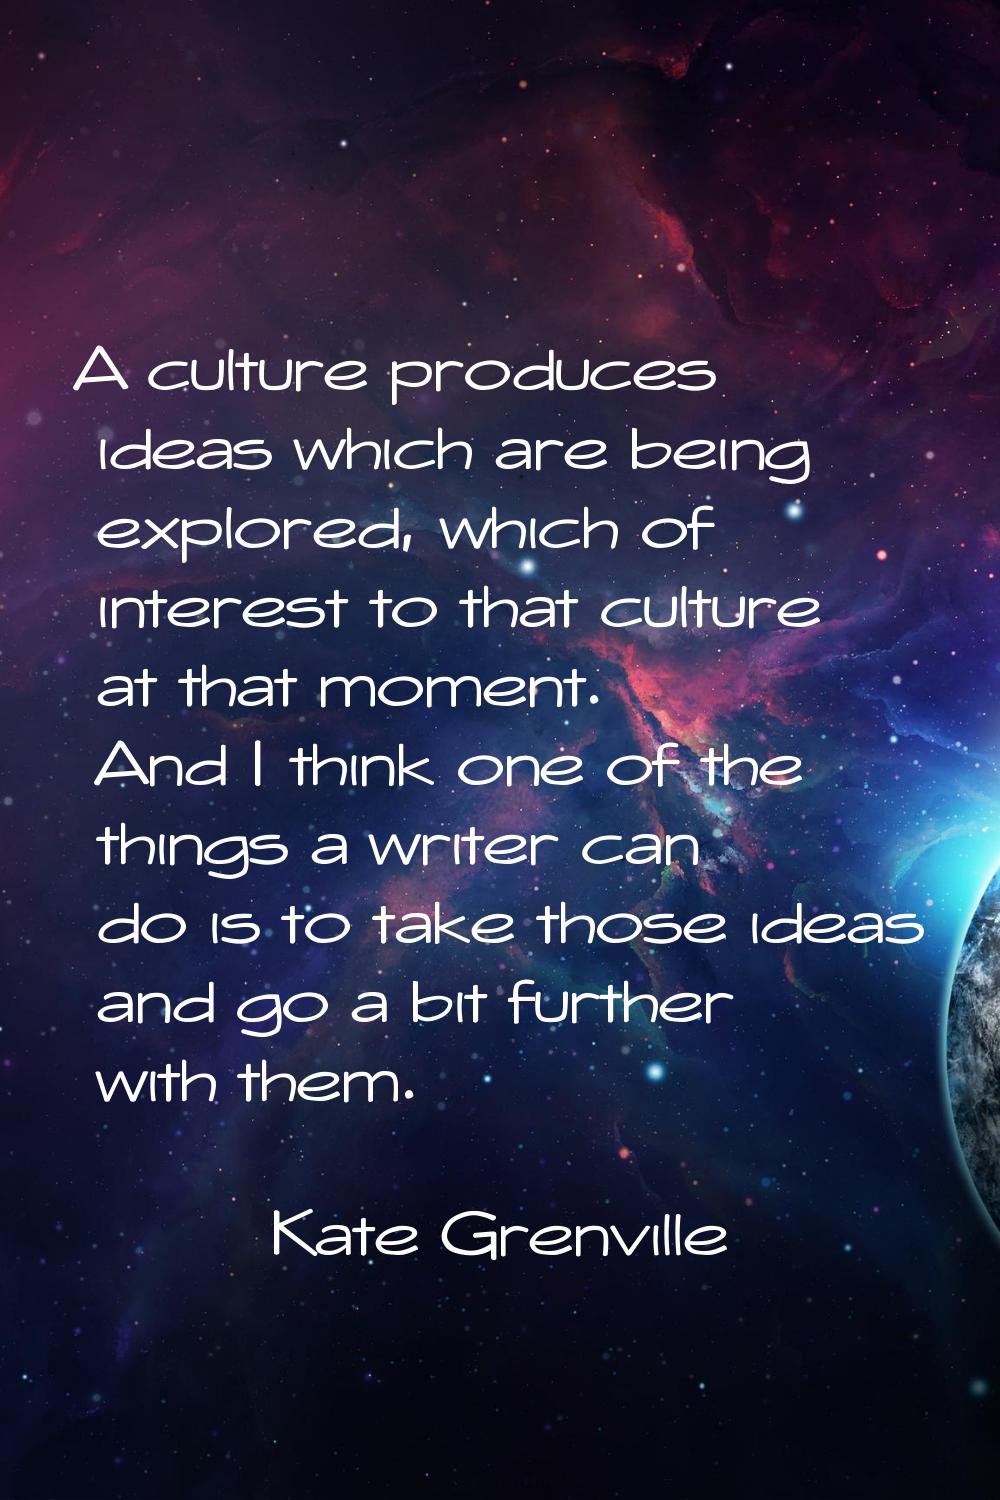 A culture produces ideas which are being explored, which of interest to that culture at that moment